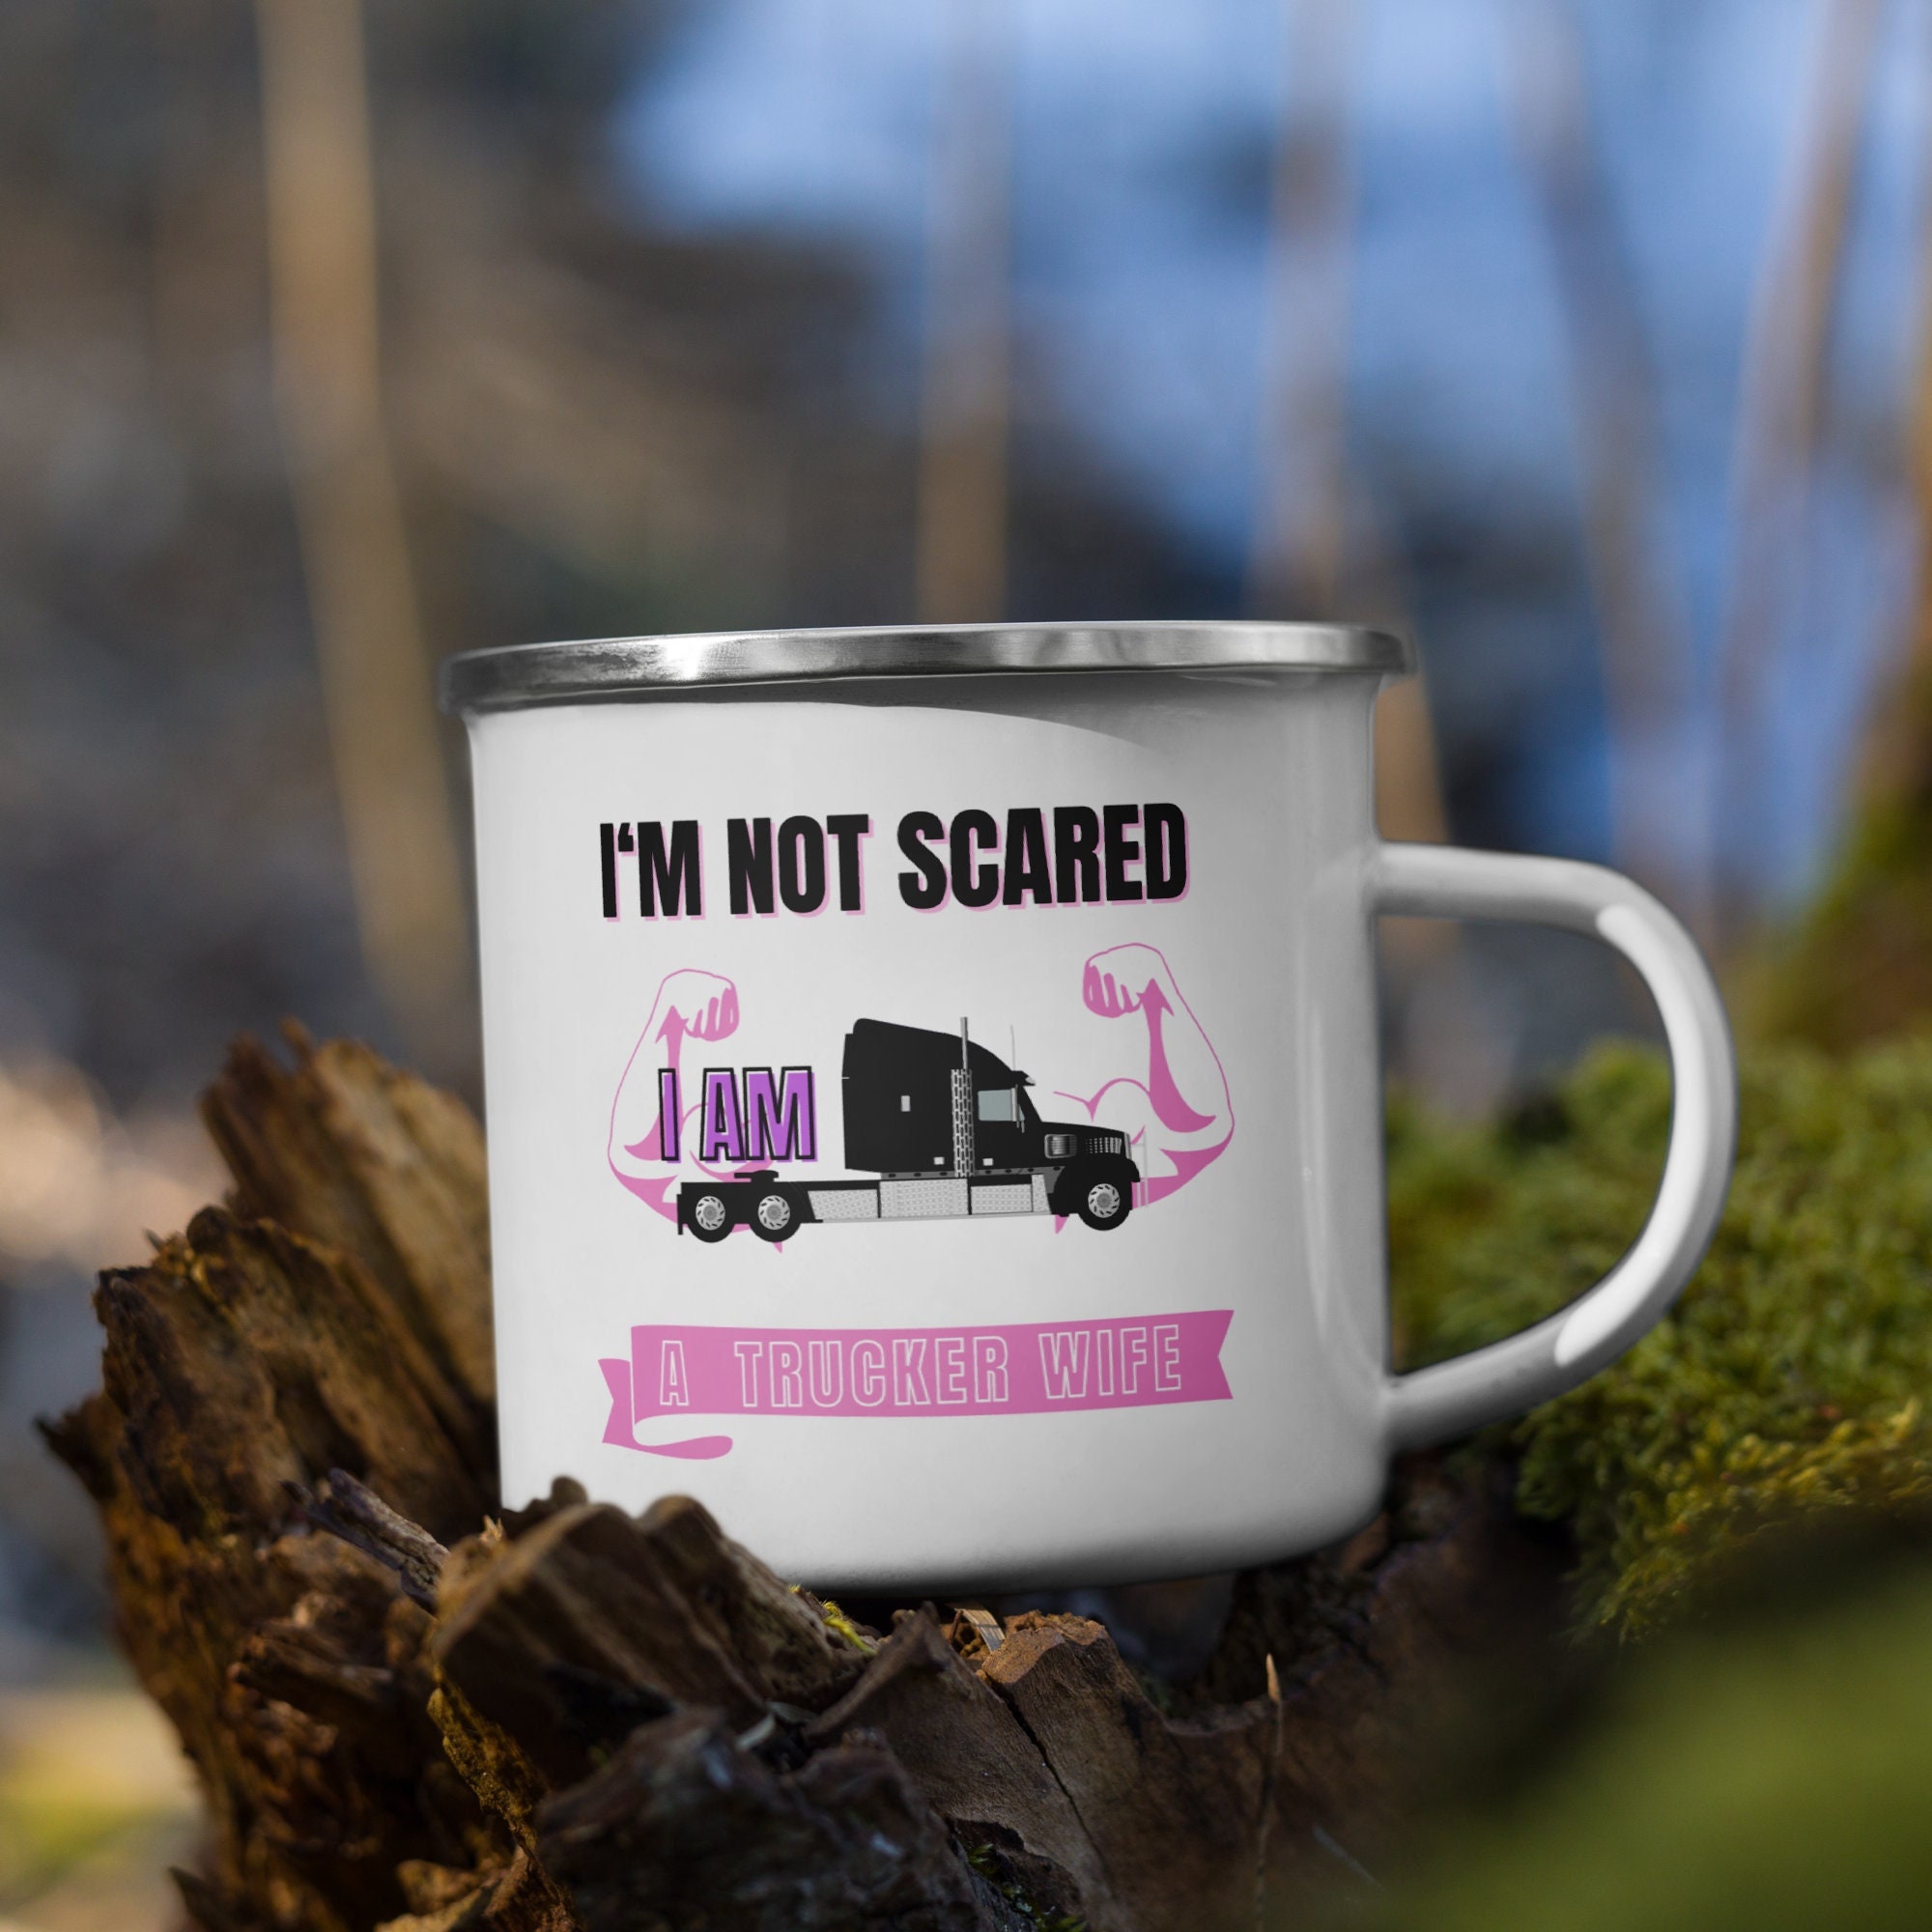 To My Trucker Wife Enamel Mug I'm Not Scared A Gift For Truckers Wife's Aniversary Truck Driver Vale